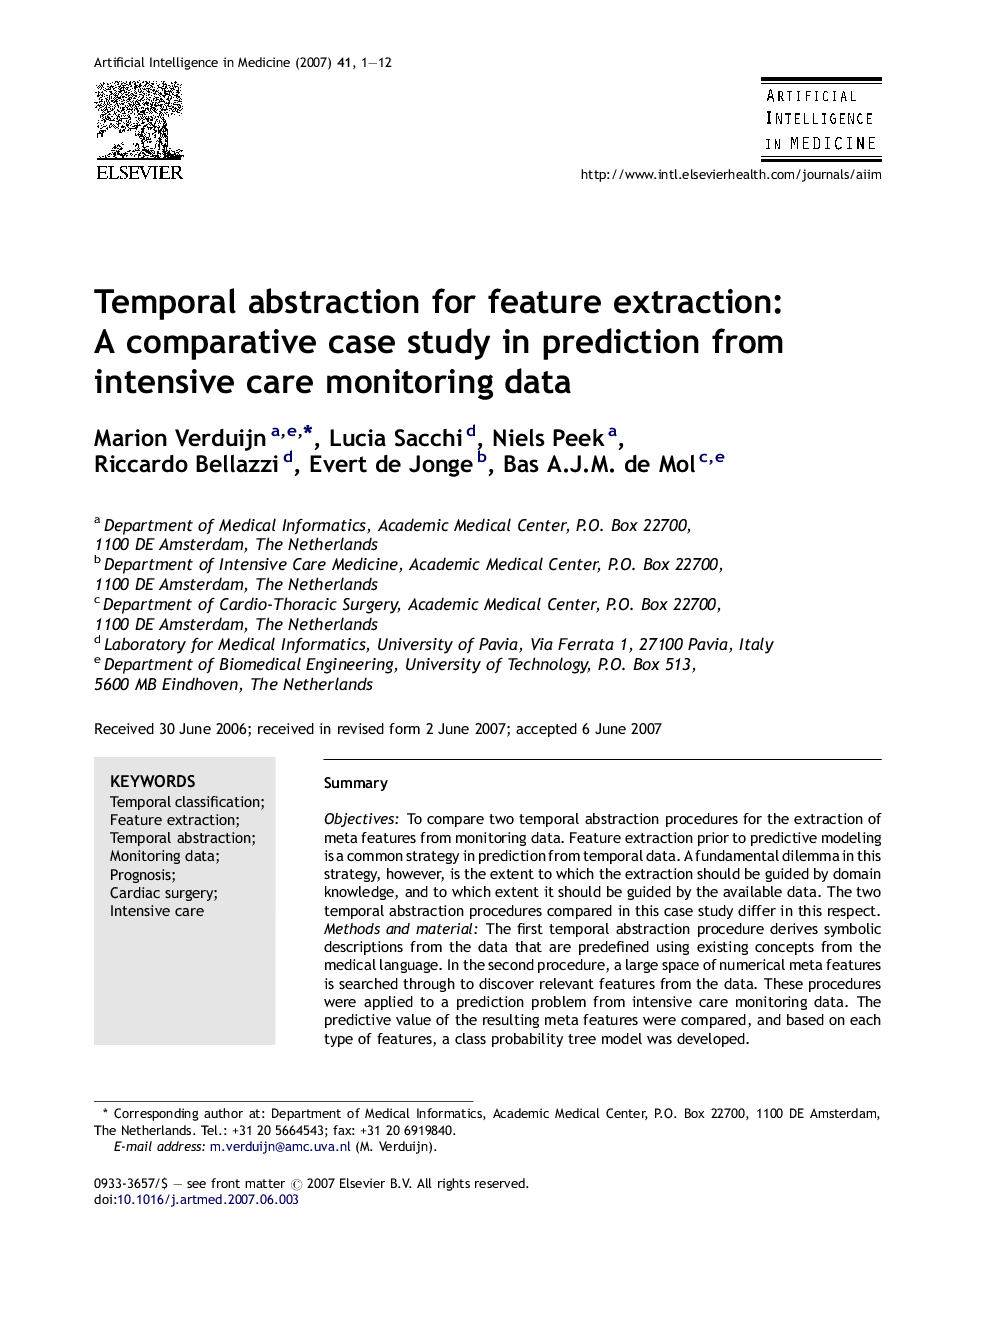 Temporal abstraction for feature extraction: A comparative case study in prediction from intensive care monitoring data